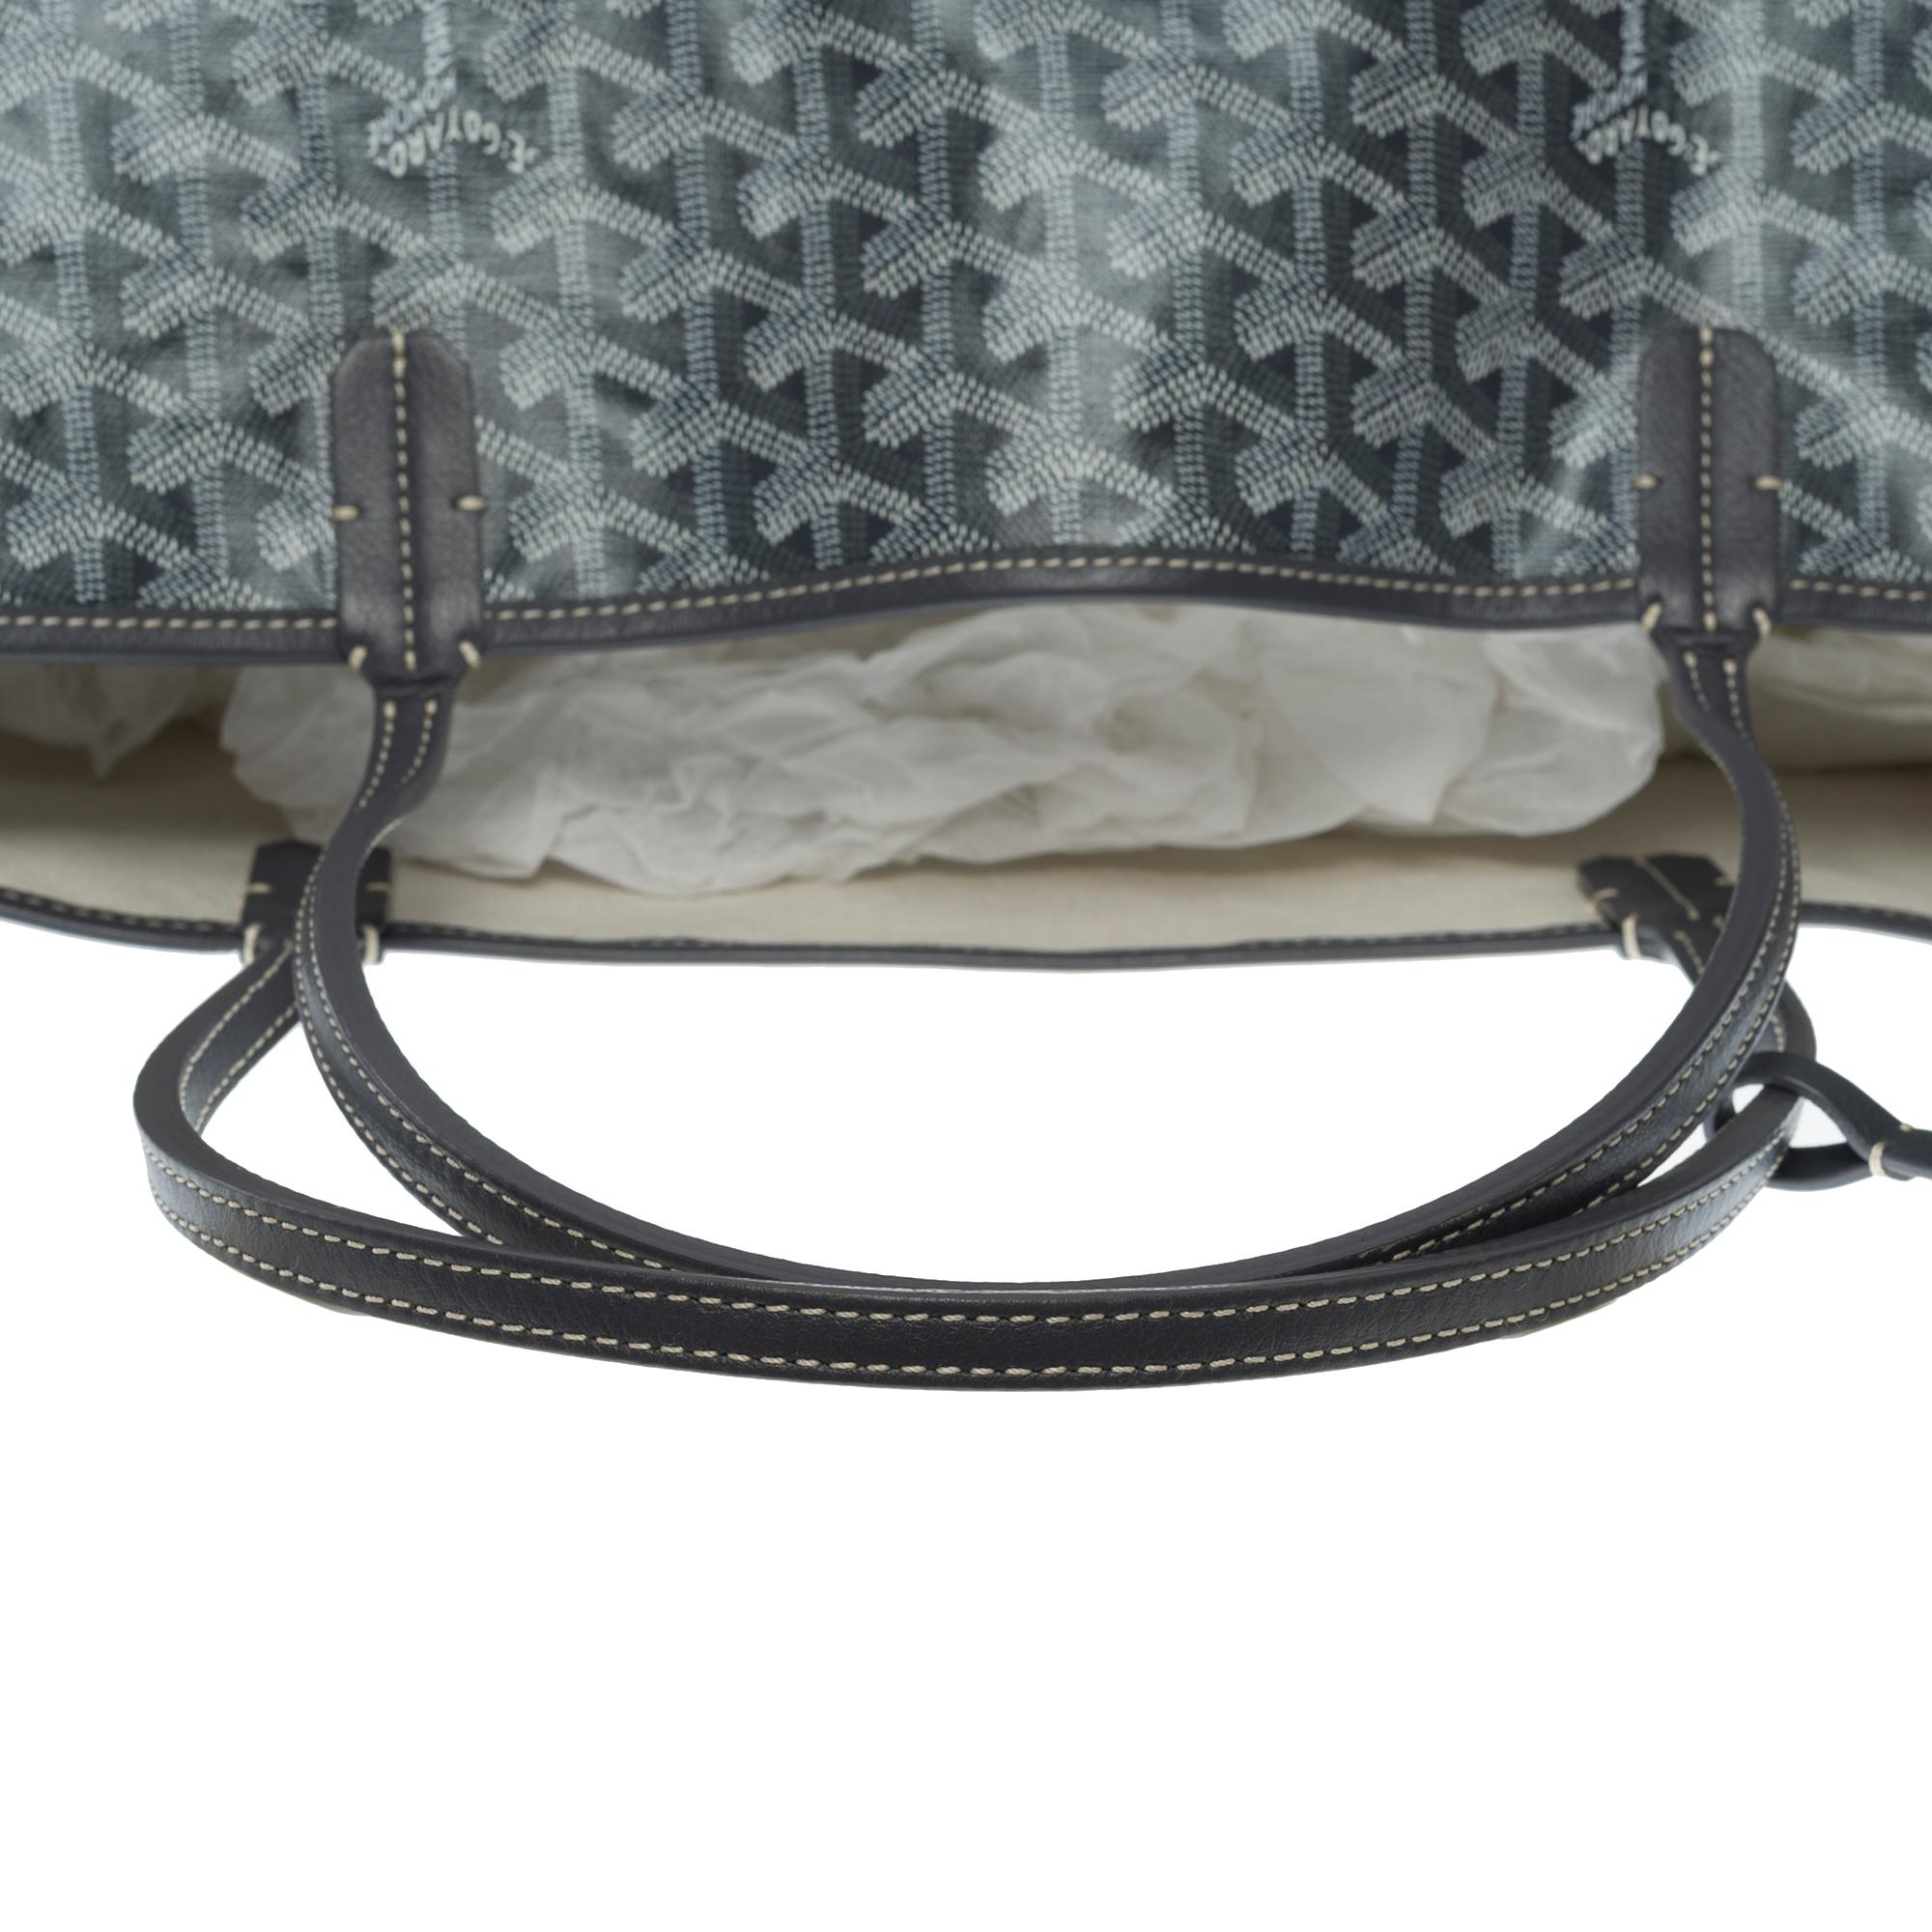 The Coveted Goyard Saint-Louis GM Tote bag in grey and white canvas, SHW 2